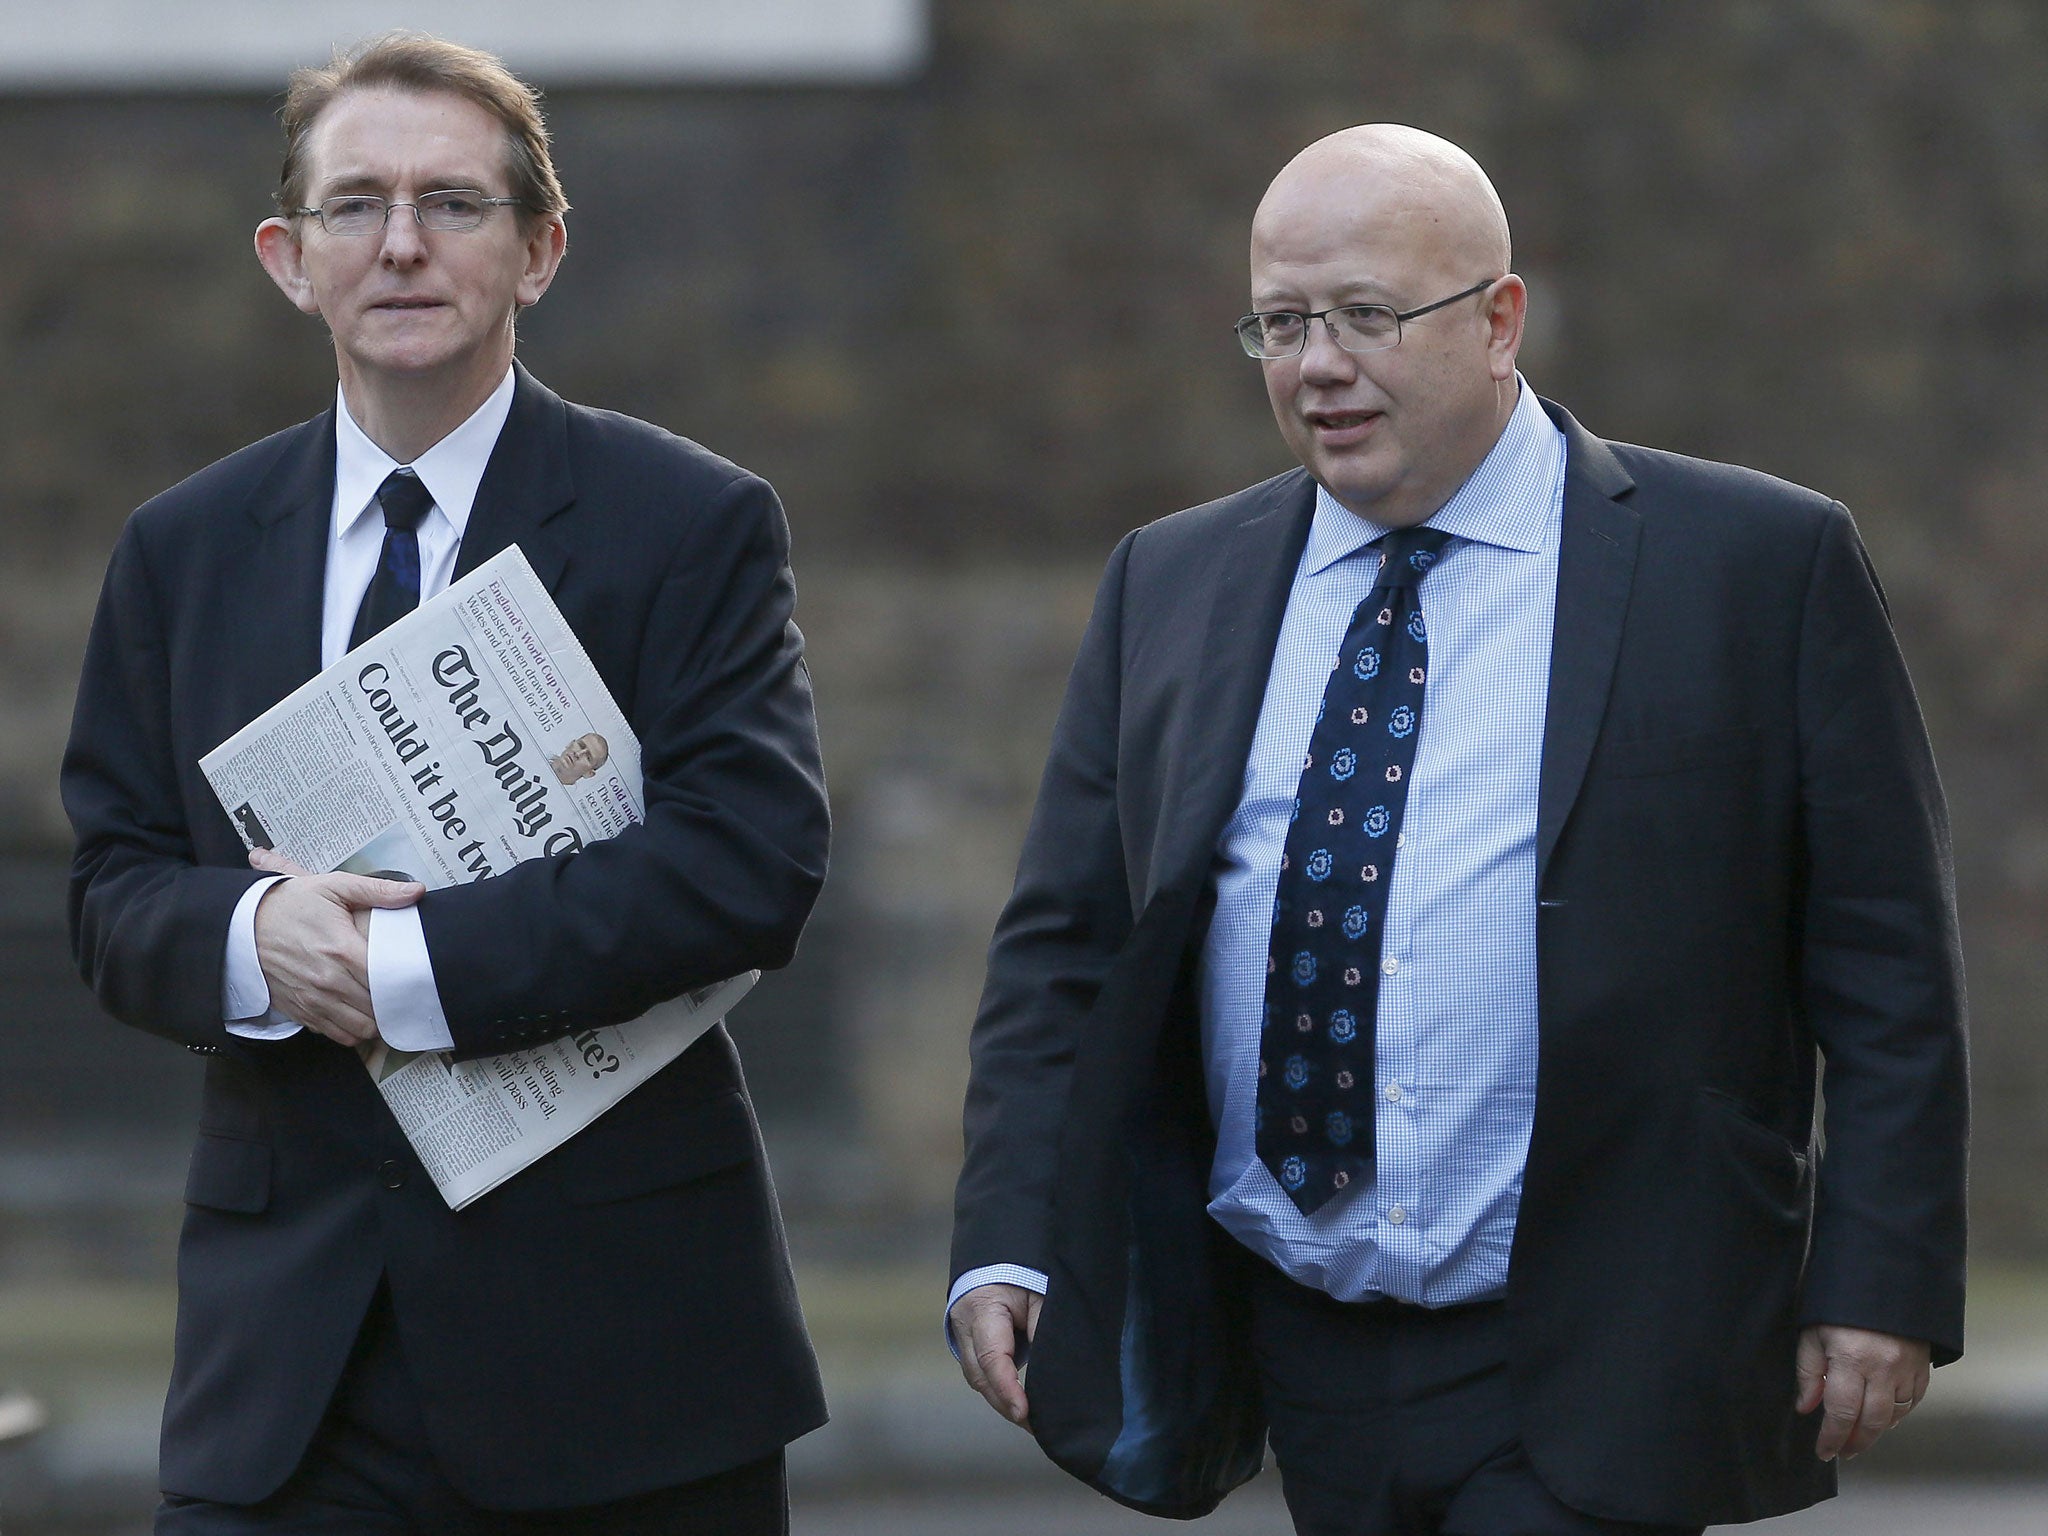 The then editors of ‘The Daily Telegraph’, Tony Gallagher, and ‘The Independent’, Chris Blackhurst, arrive for a meeting on press regulation at Downing Street in December 2012